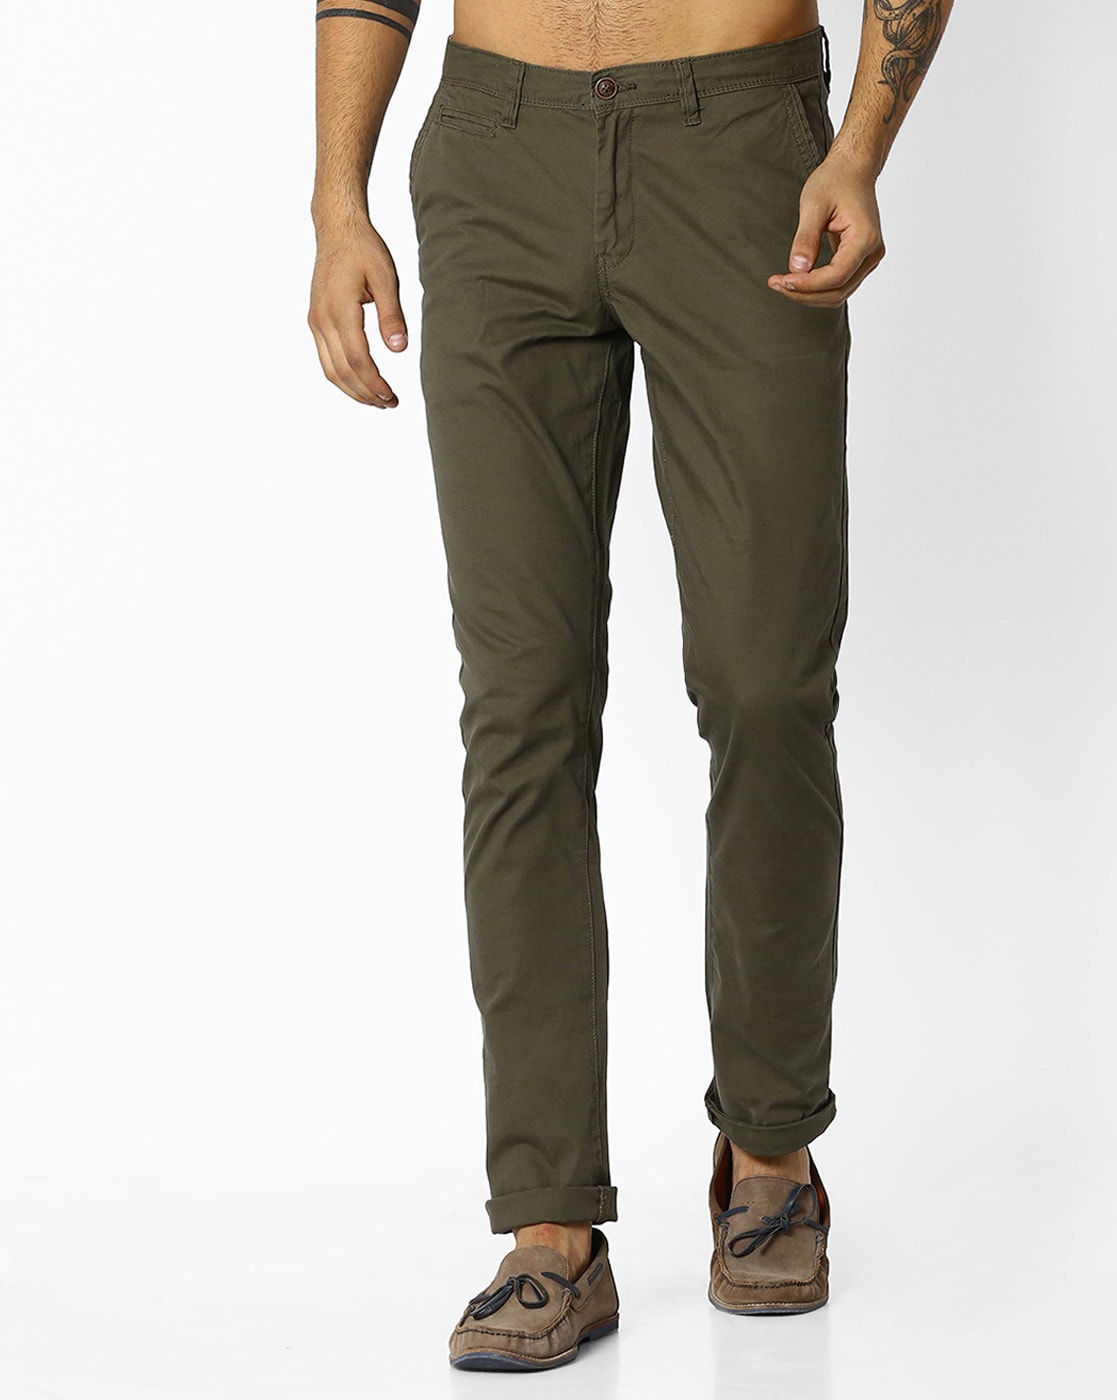 New Henil Cloth & Tailors - Green Chinos Pants & White Oxford Shirt |  Facebook